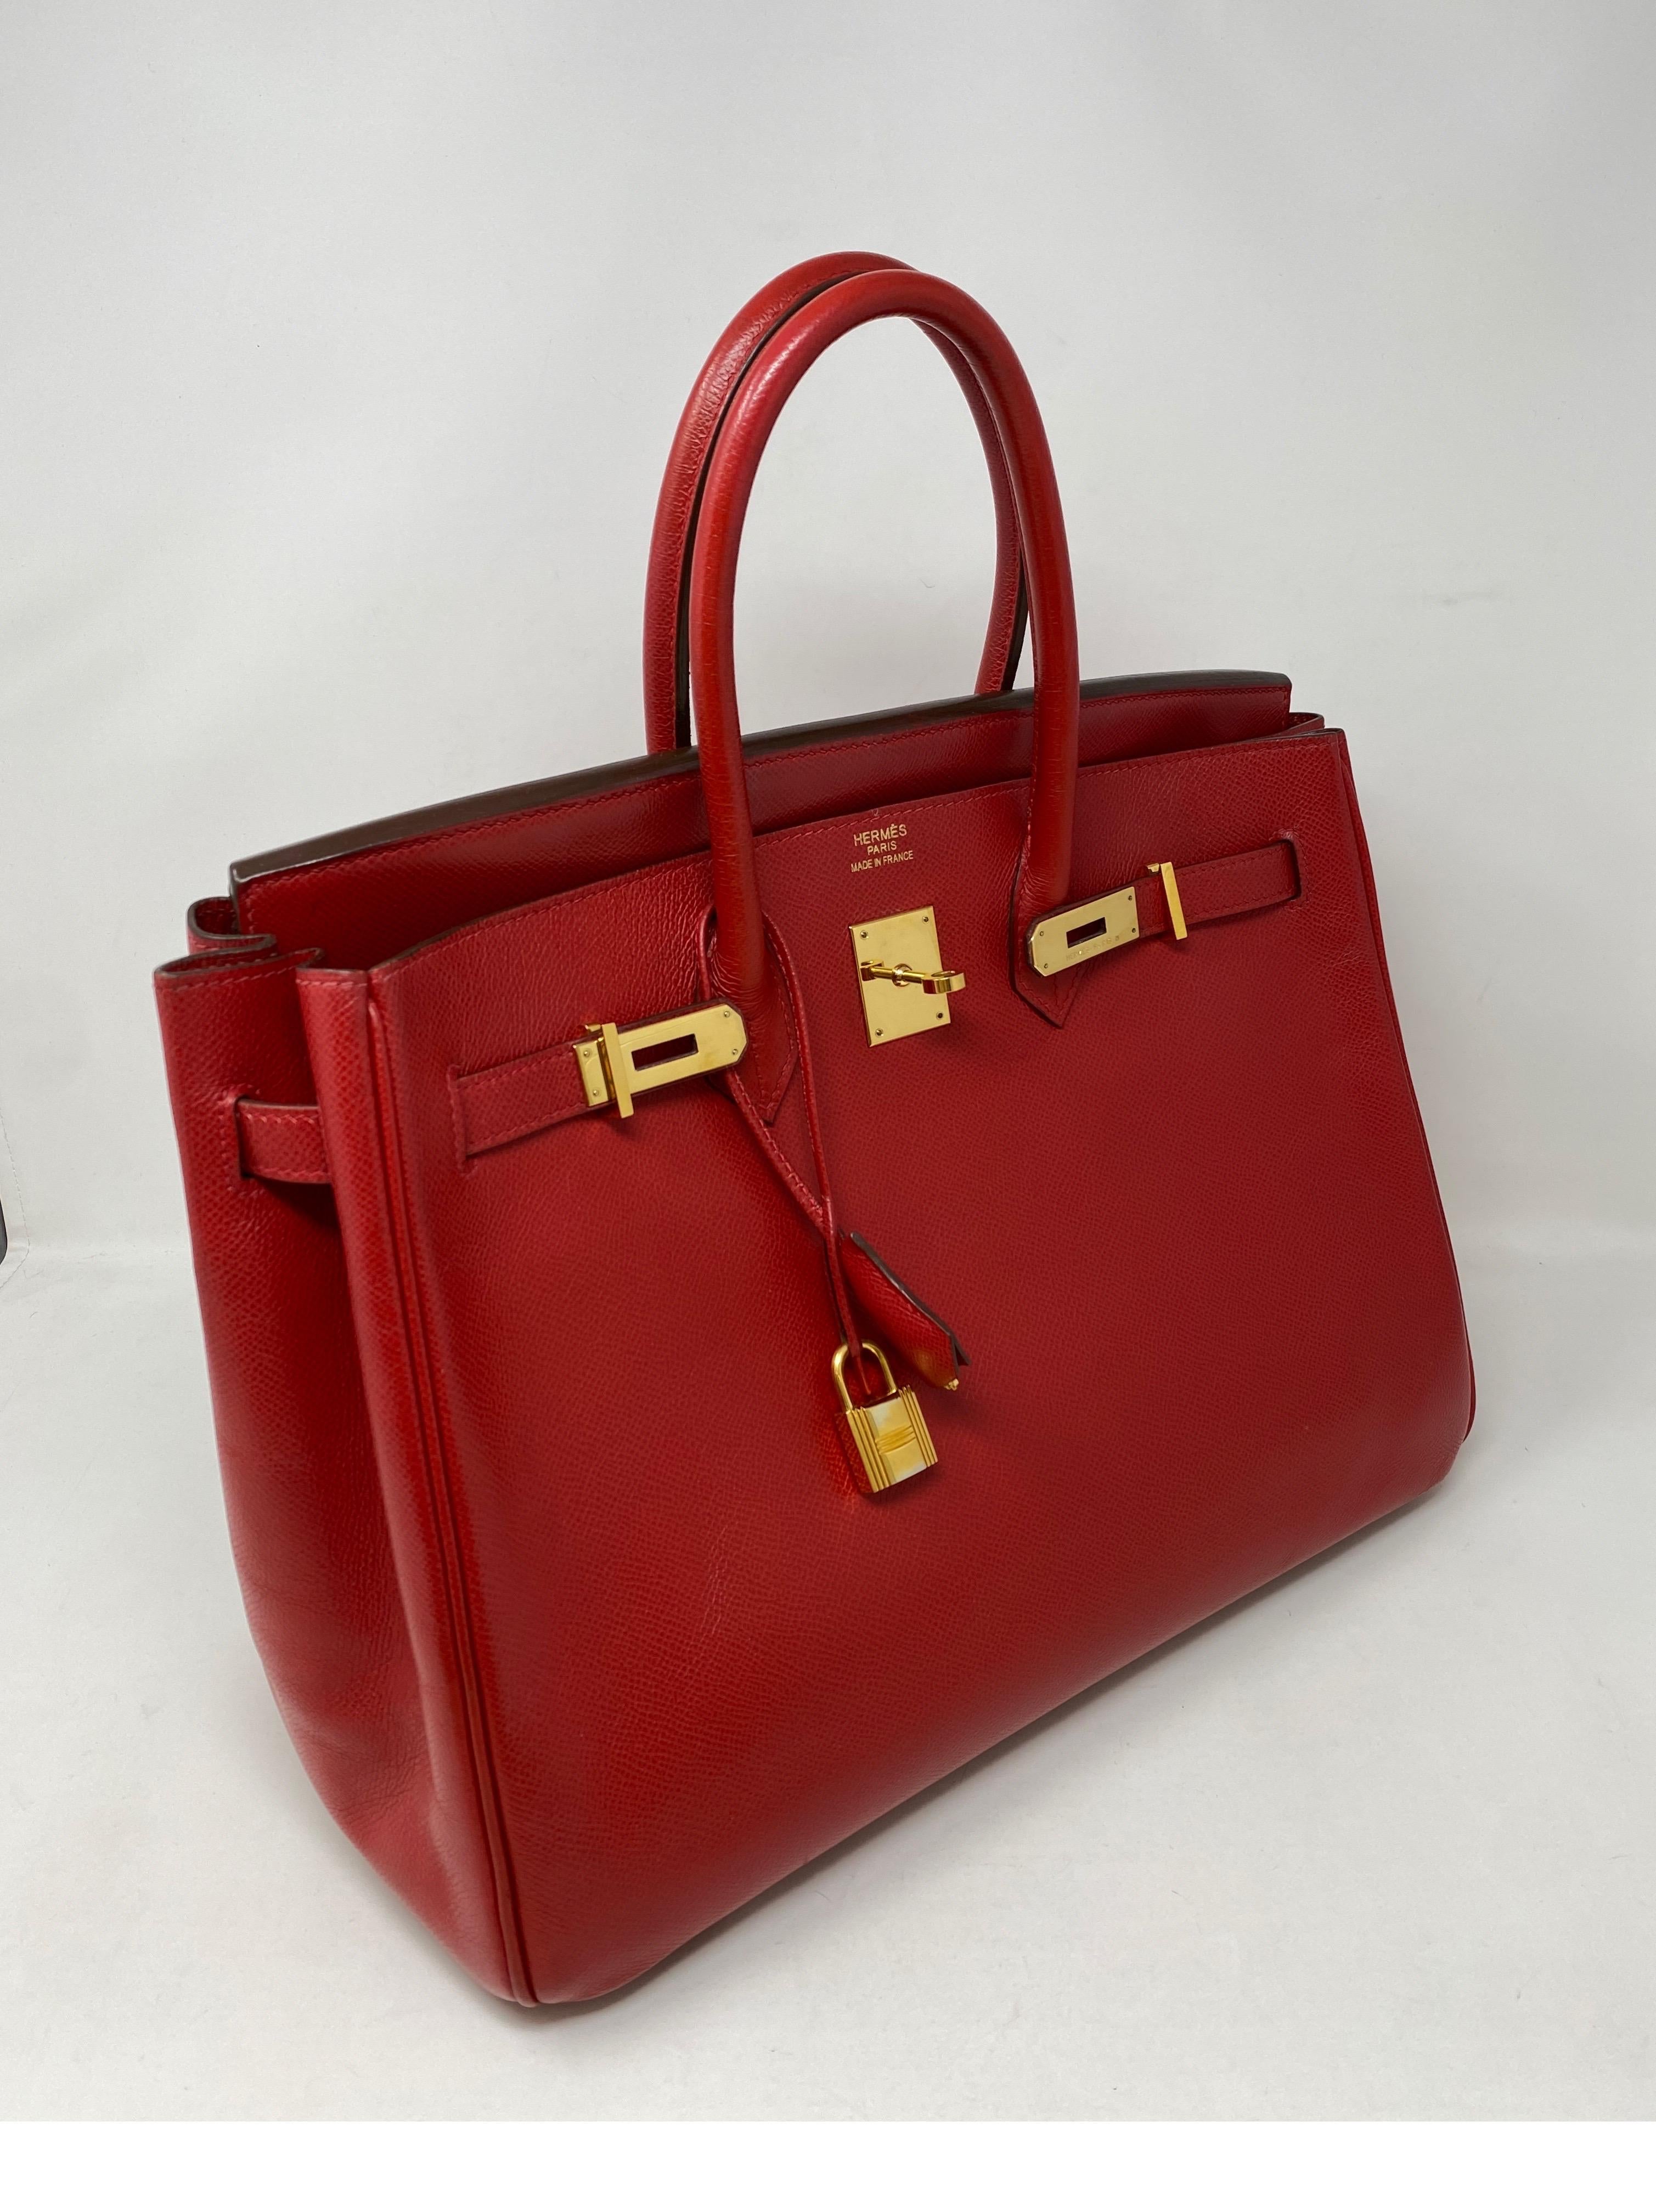 Hermes Birkin 35 Rouge Casaque Bag. Some light crease wear. Good condition overall. Gold hardware. Priced to sell. Beautiful red color bag. Guaranteed authentic. 